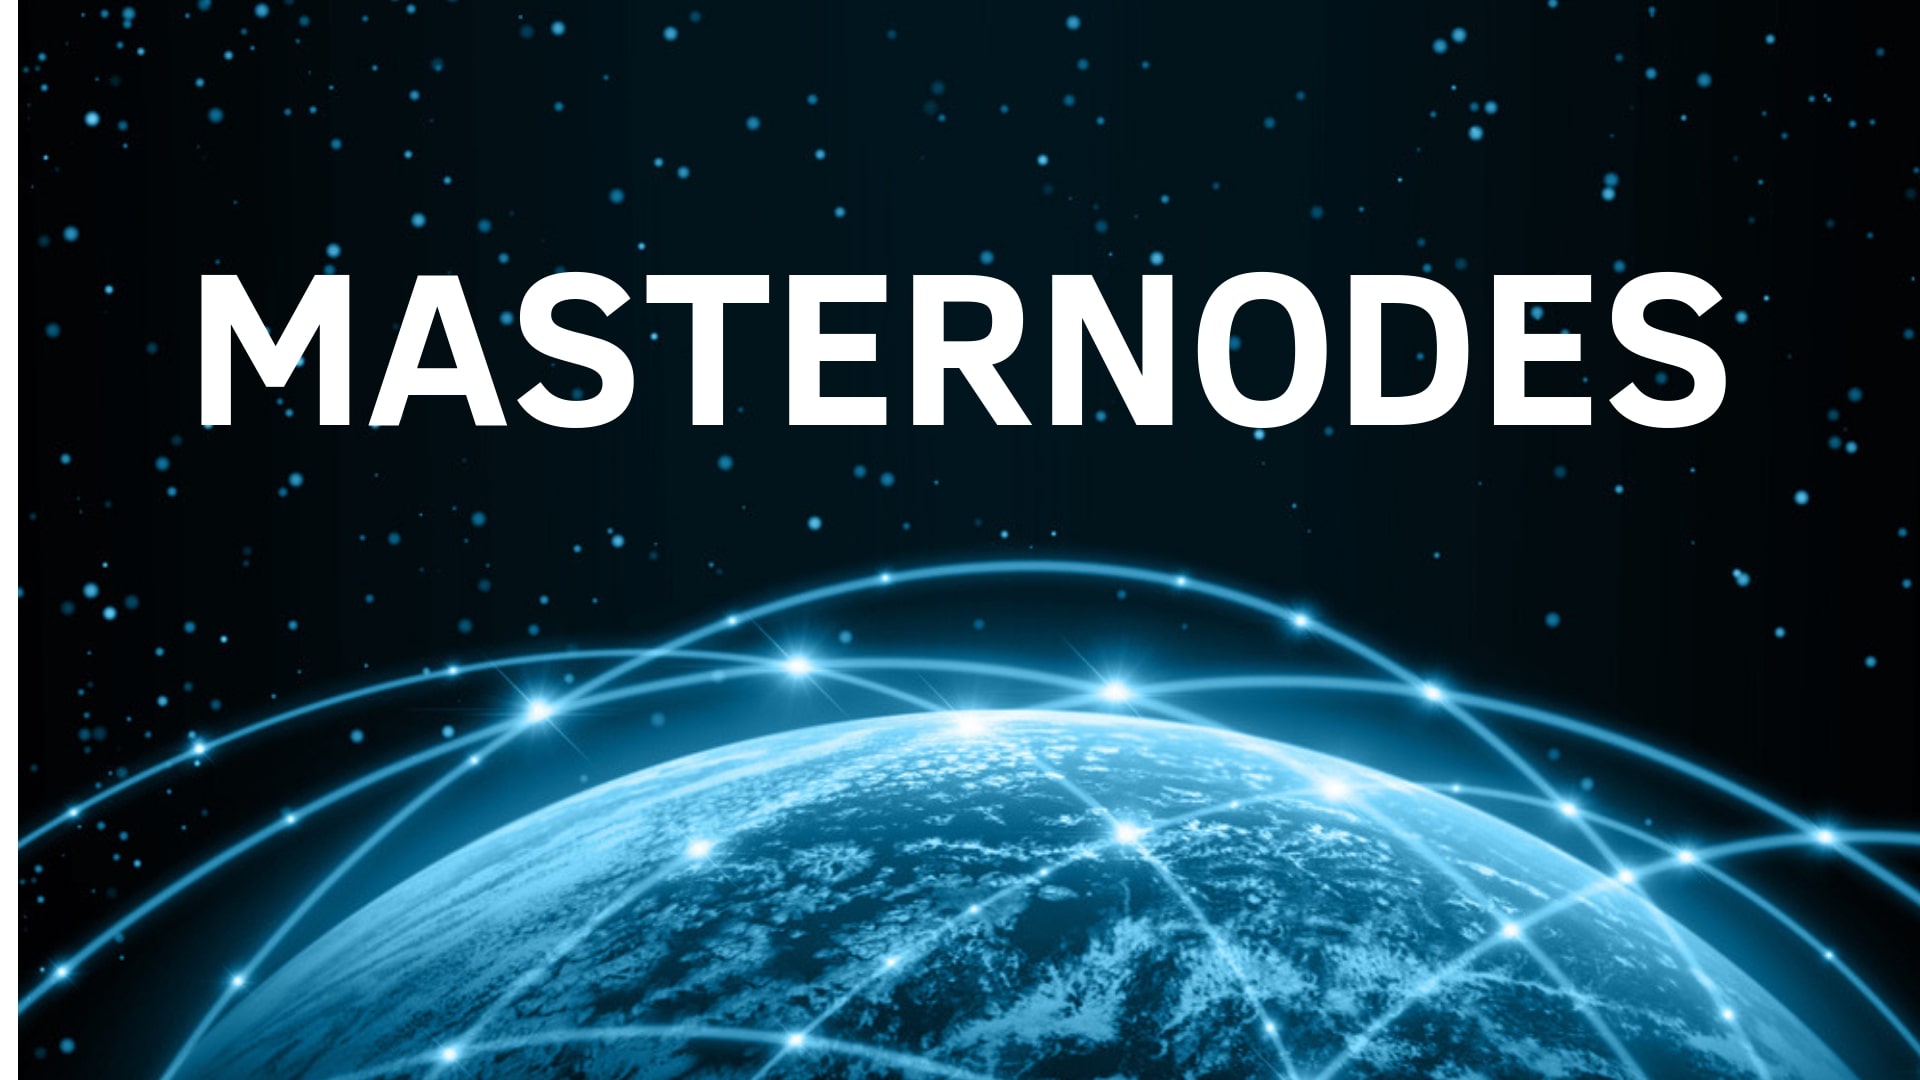 What Are Masternodes? What Differs Them From Mining?